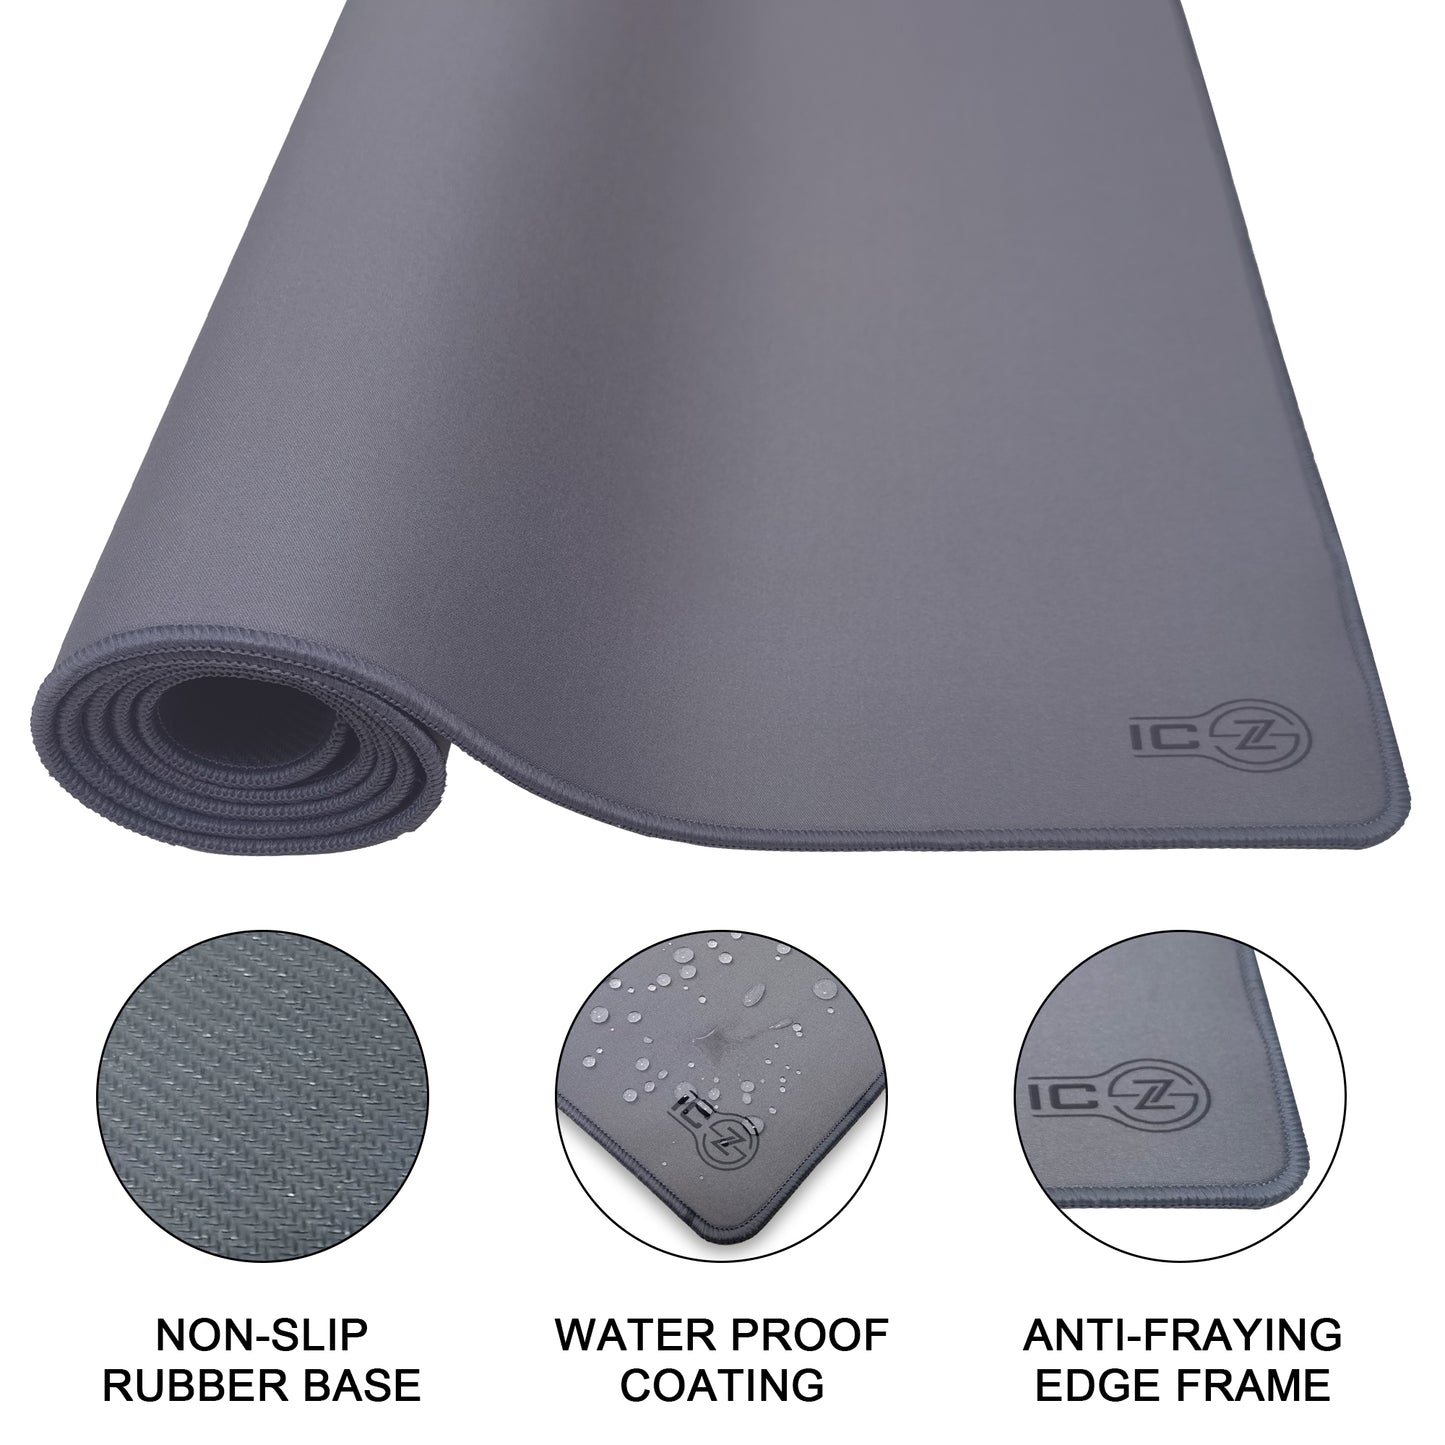 Extended Gaming Mousepads (STEEL GRAY) - Sizes (XL, XXL, 3XL, 4XL)